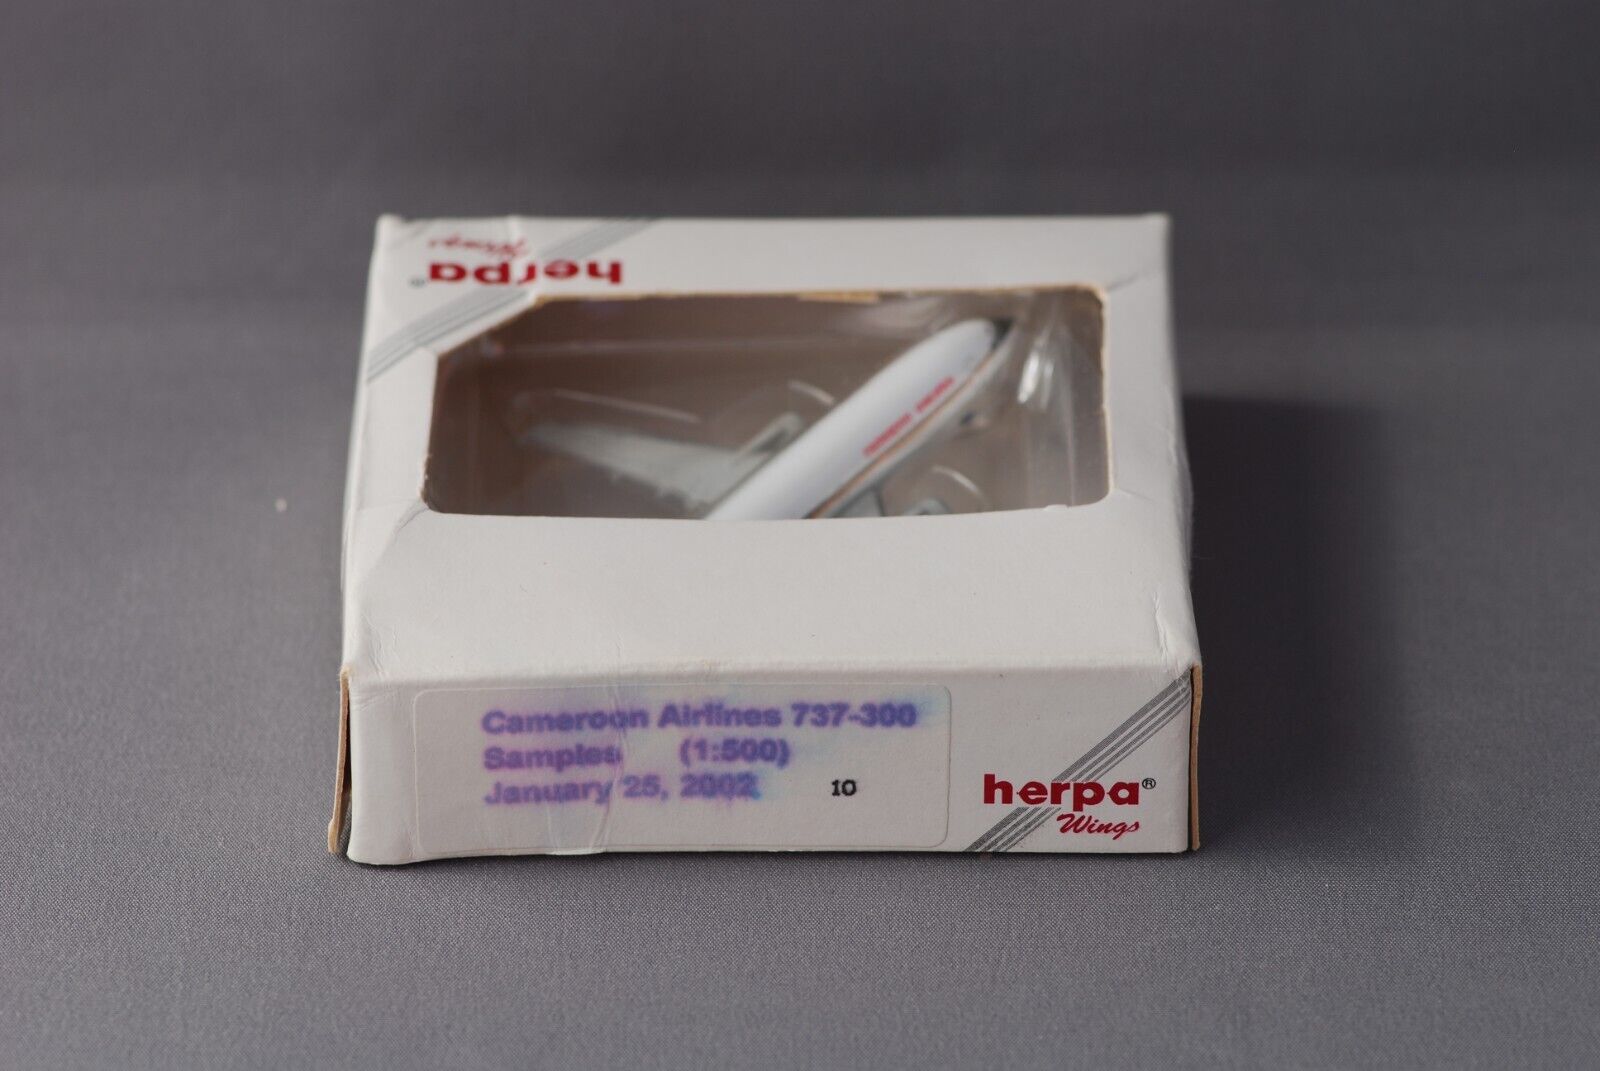 Cameroon Airlines B737-300 SAMPLE, Herpa Wings 1:500, TJ-CBG, never produced